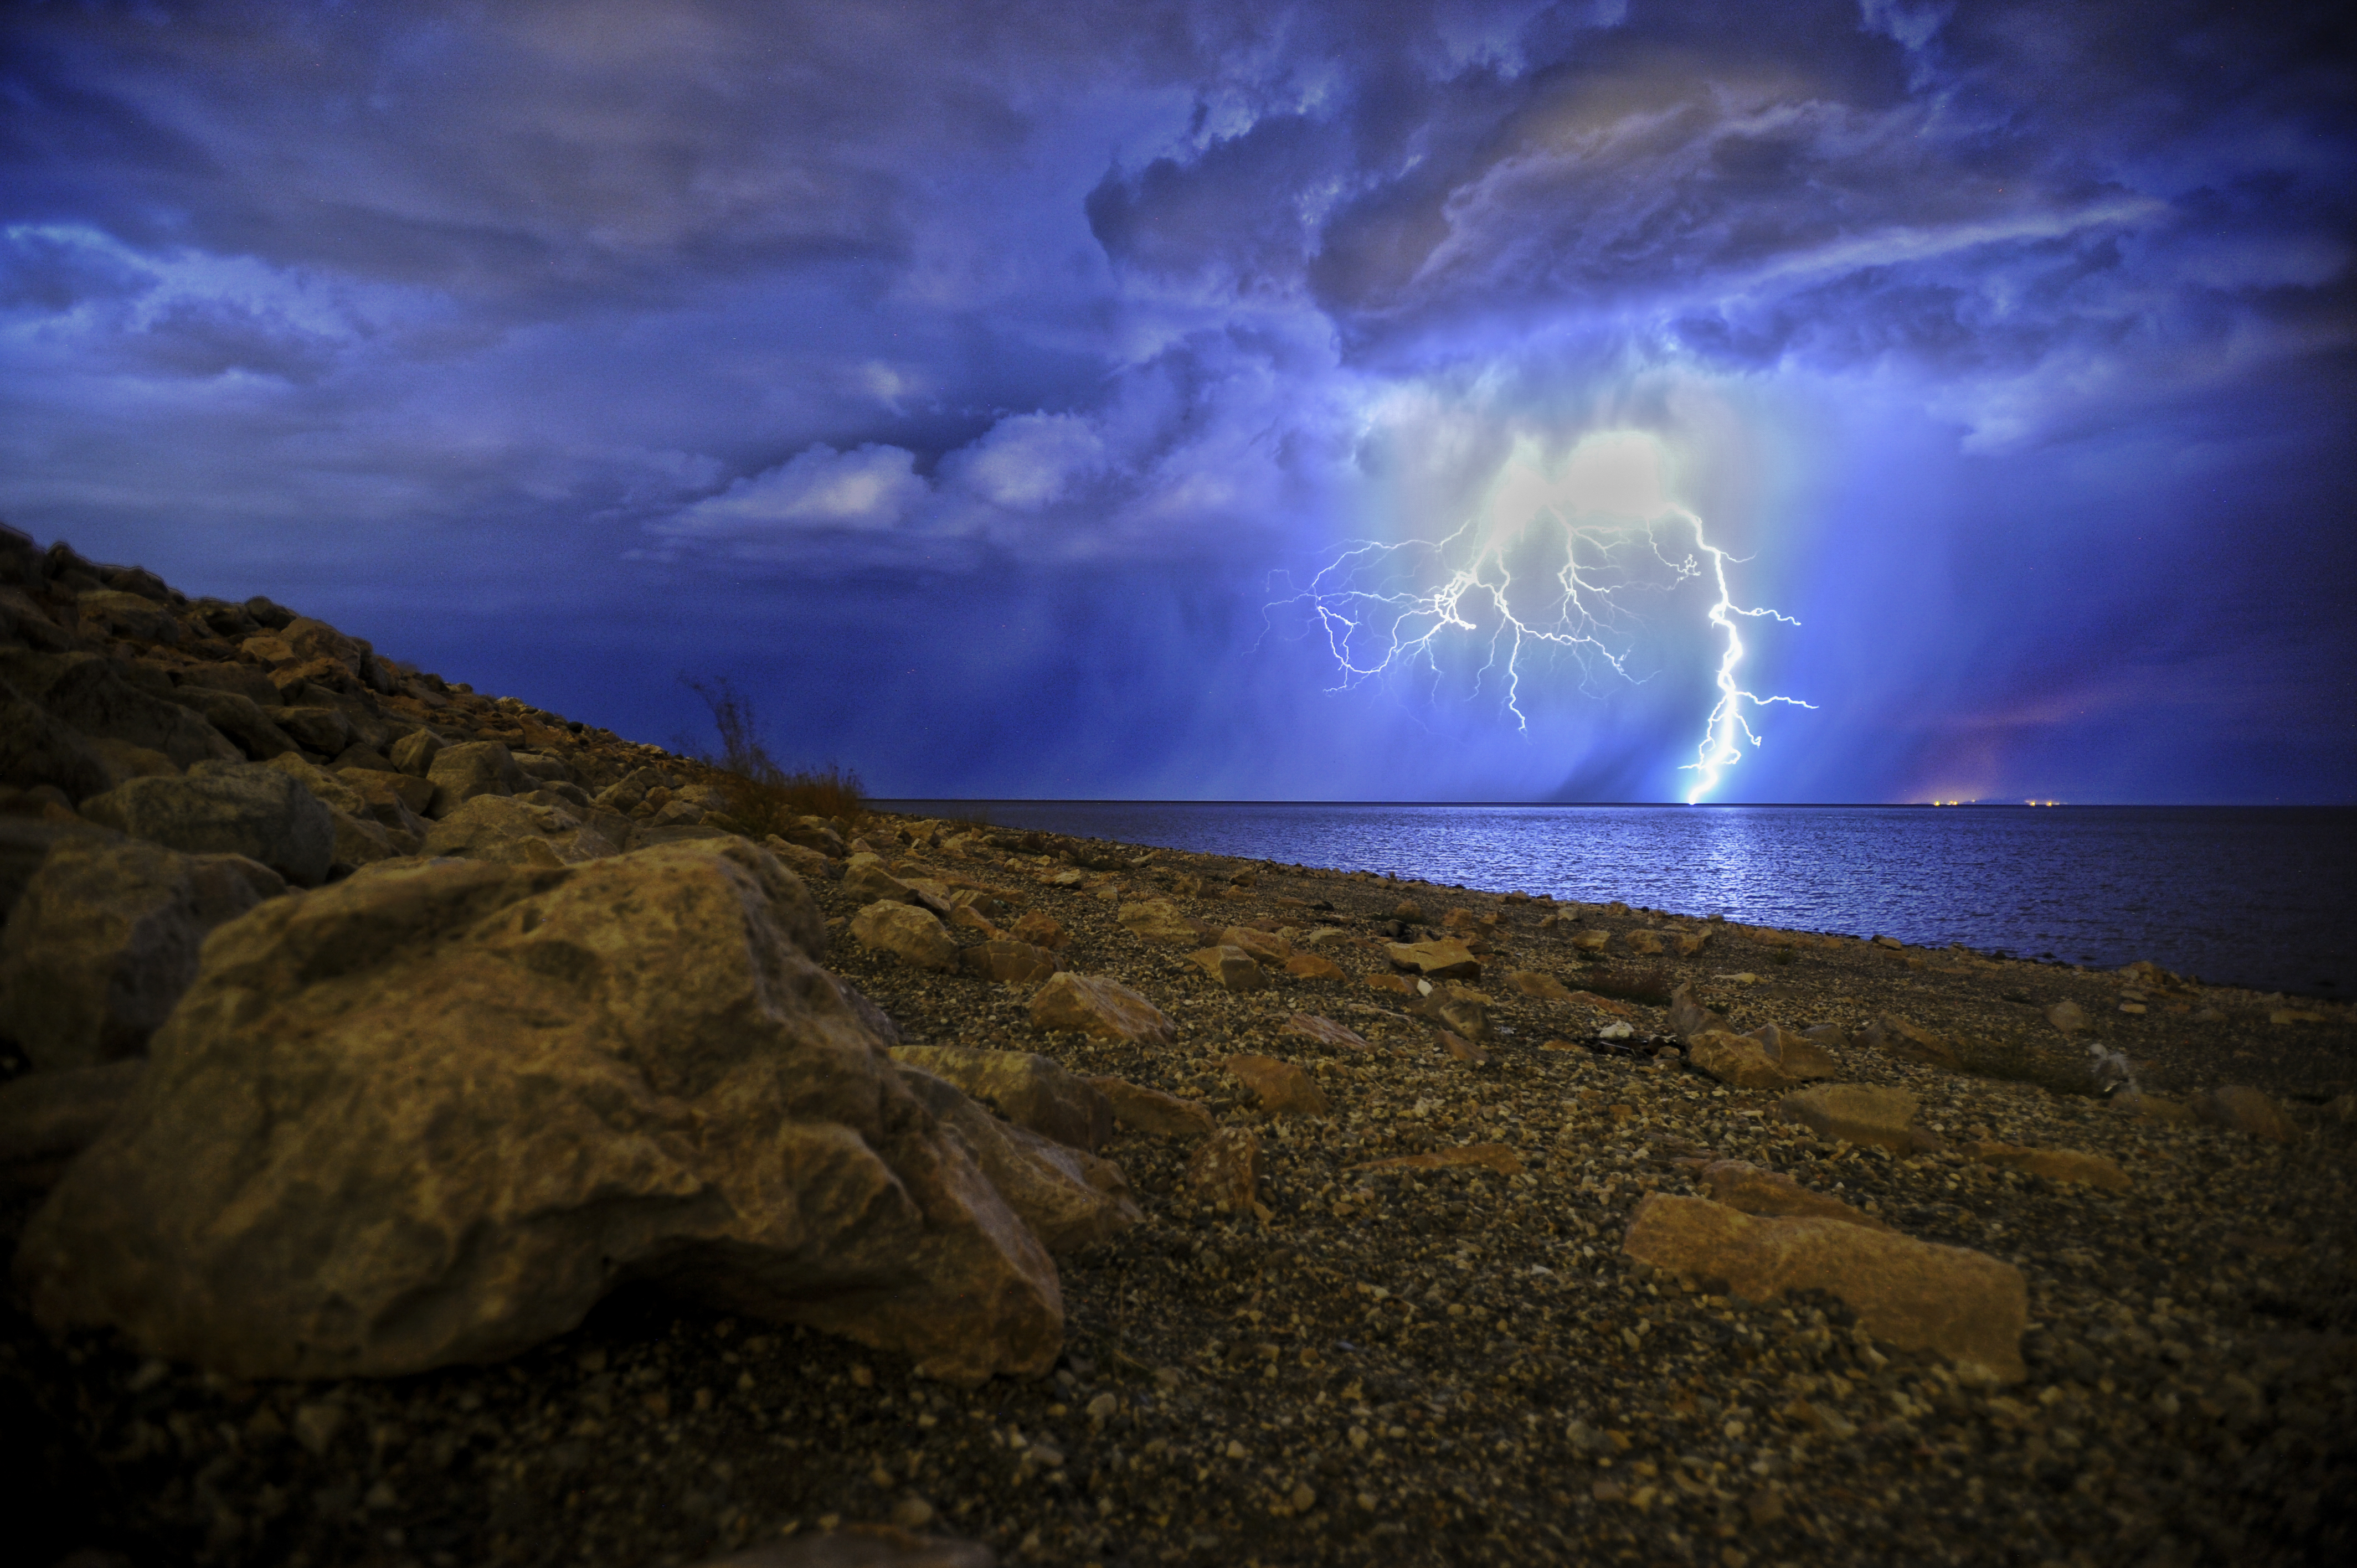 thunderstorm, nature, night, lake, shore, bank, mainly cloudy, overcast, storm HD wallpaper